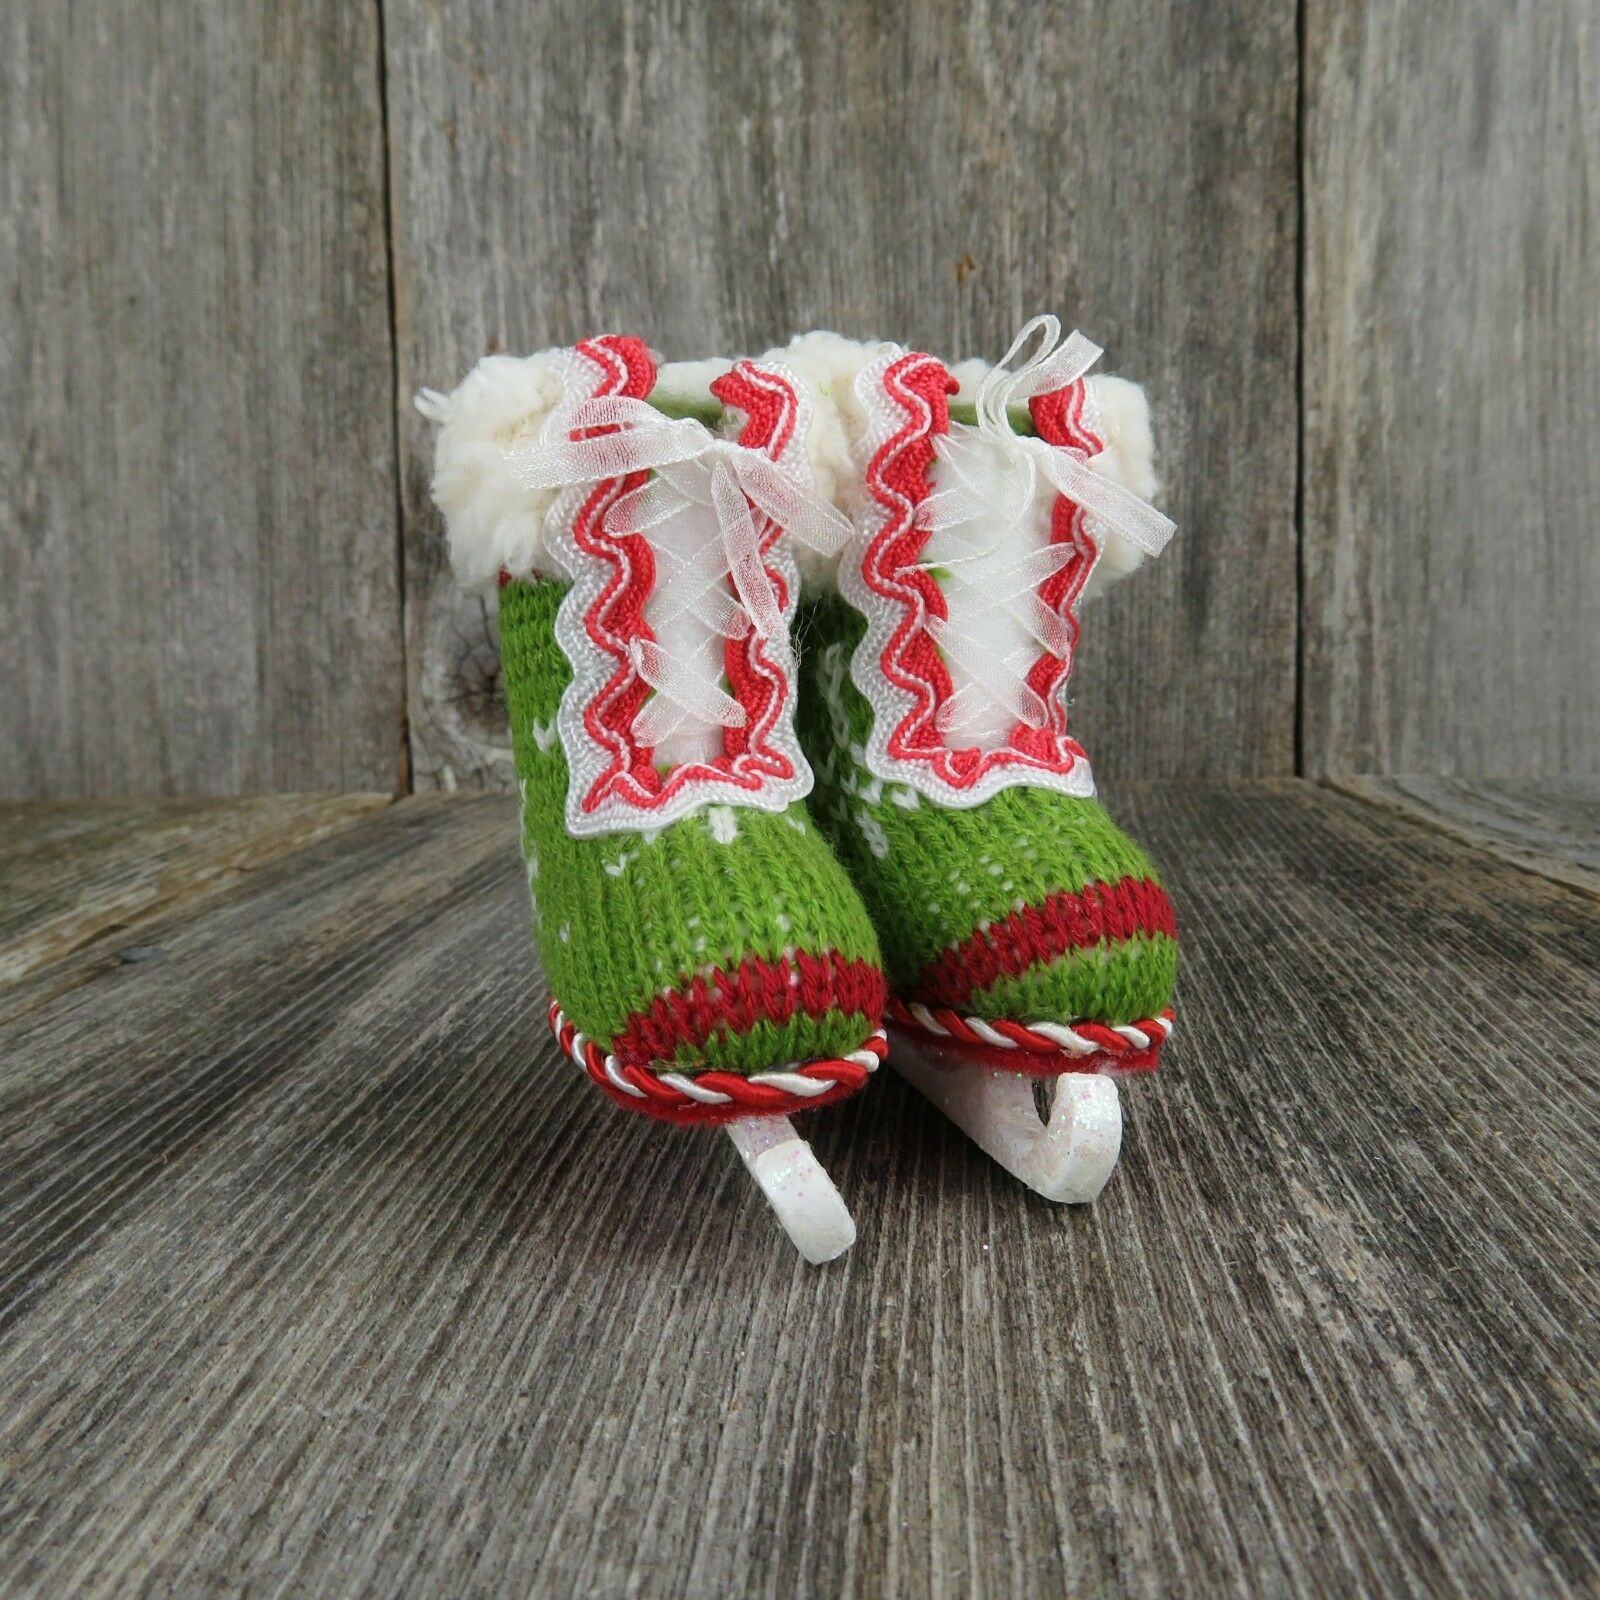 Vintage Ice Skates Ornament Knit Wood Stocking Rustic Old World Green Red White - At Grandma's Table